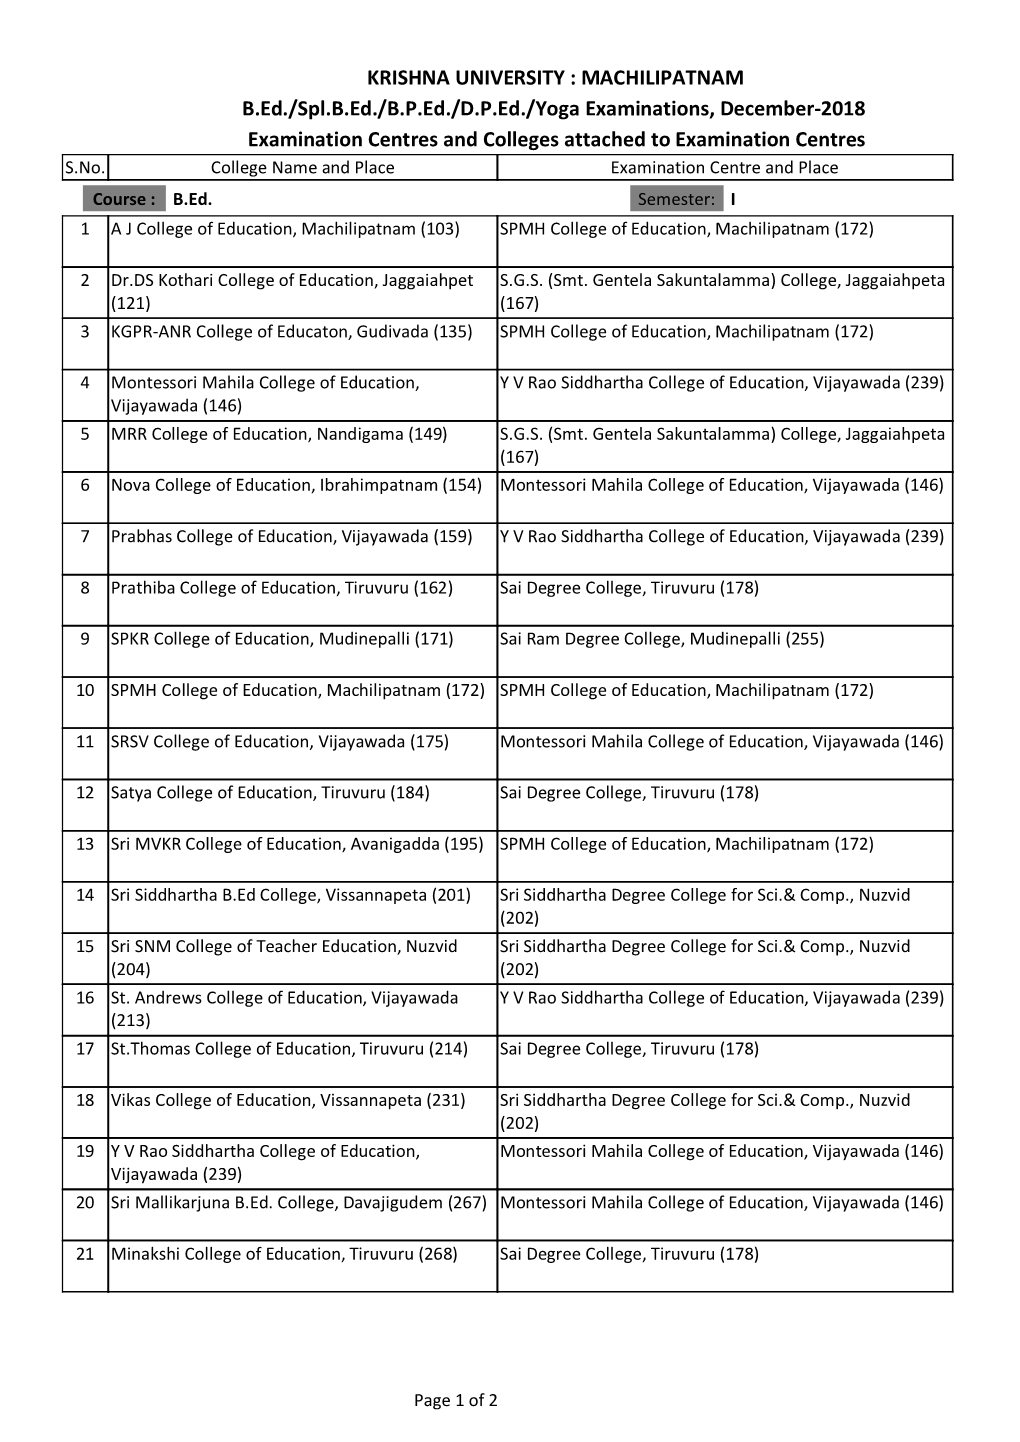 Examination Centres and Colleges Attached to Examination Centres S.No